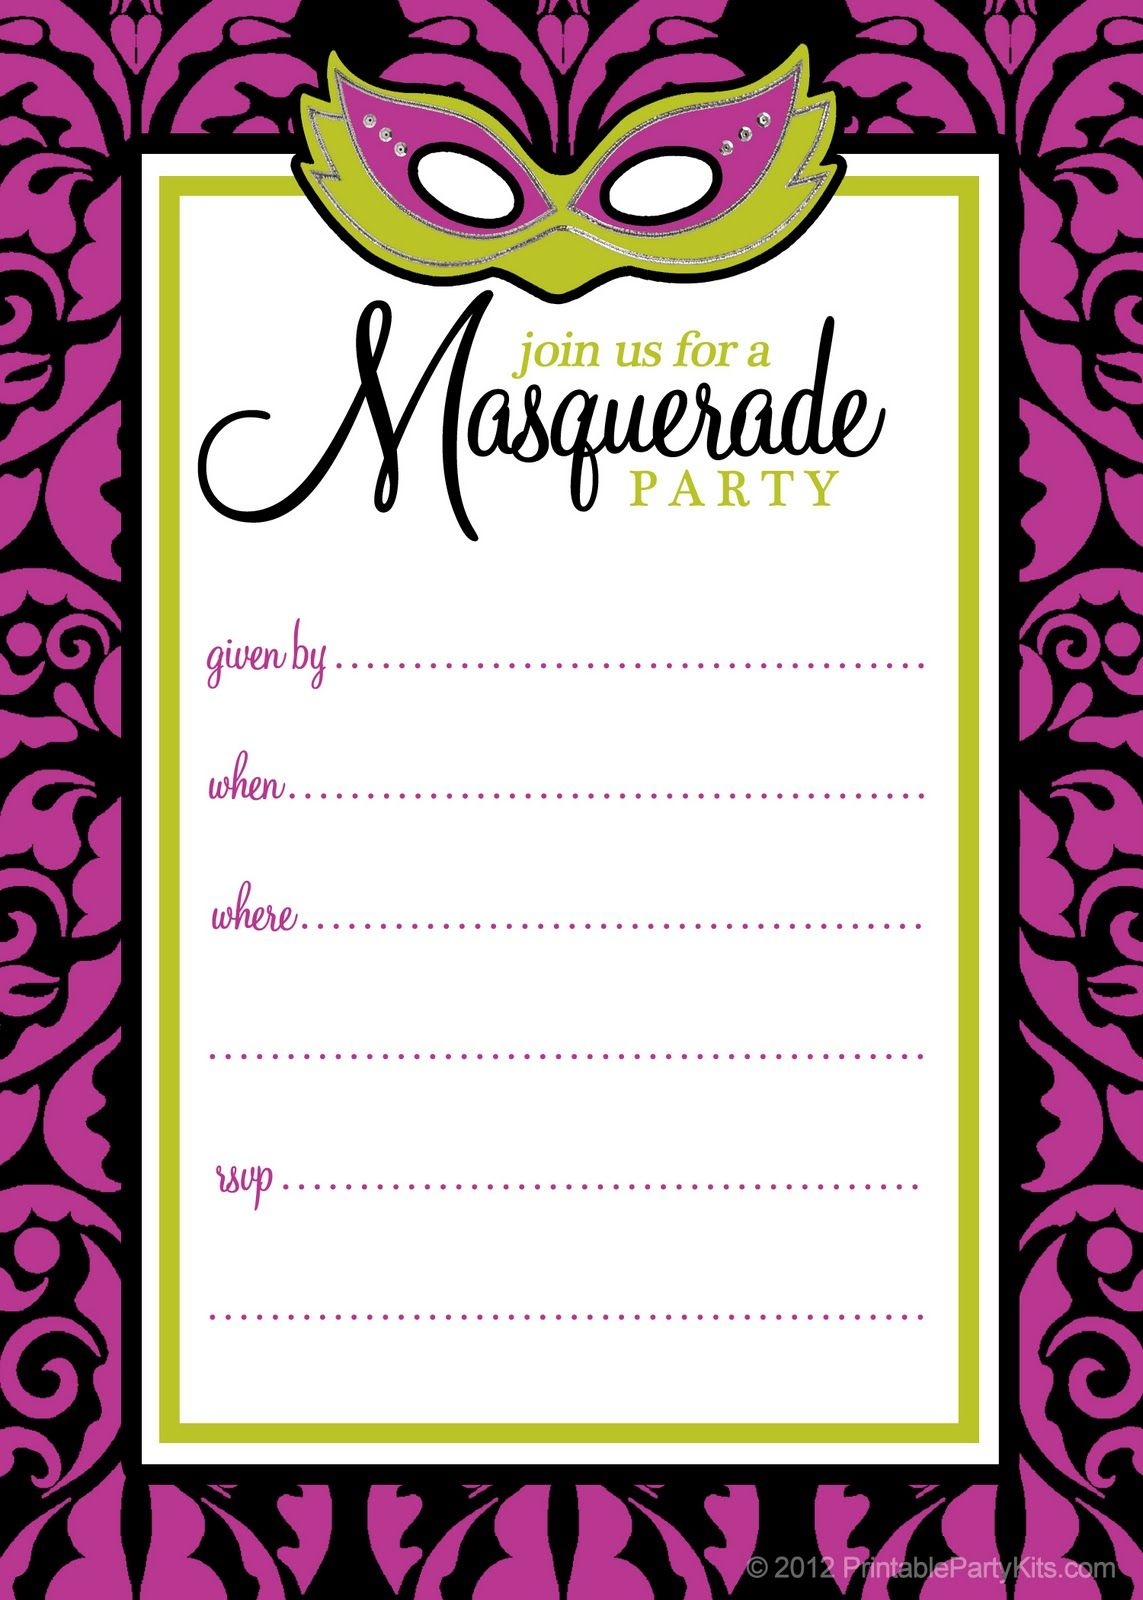 Free Printable Party Invitations Masquerade Or Mardi Gras Party throughout dimensions 1143 X 1600